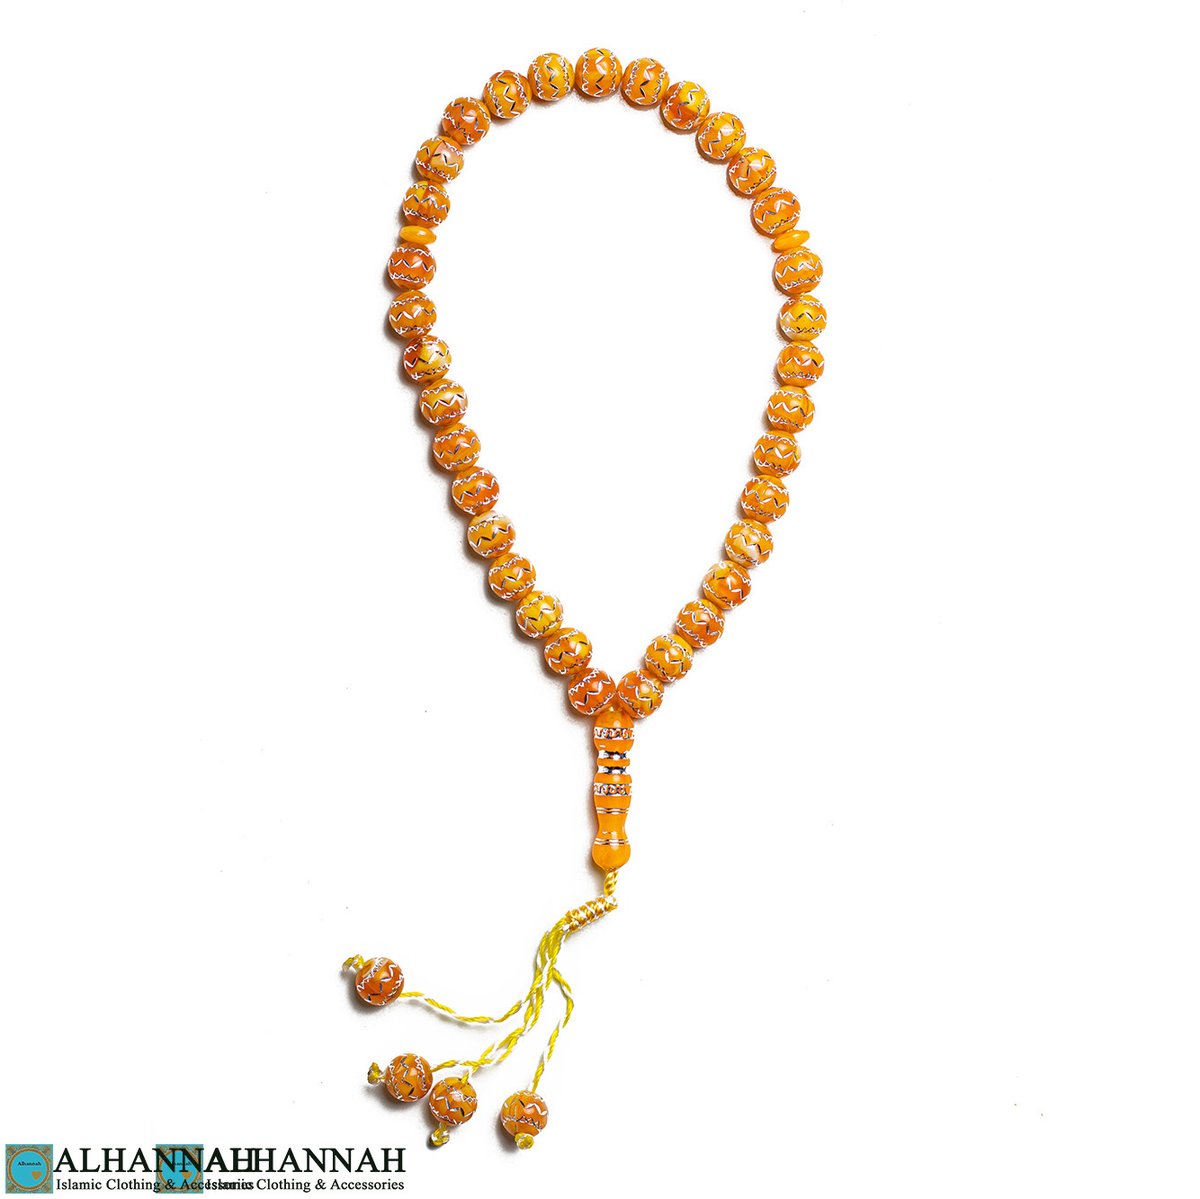 🕌💎 Add some elegance to your daily prayers with our High Quality Turkish Prayer Beads! Crafted with care for a beautiful and durable design.
#PrayerBeads #MuslimFashion #ModestFashion #DhkirBeads #TasbihBeads

👉 alhannah.com/product-catego…